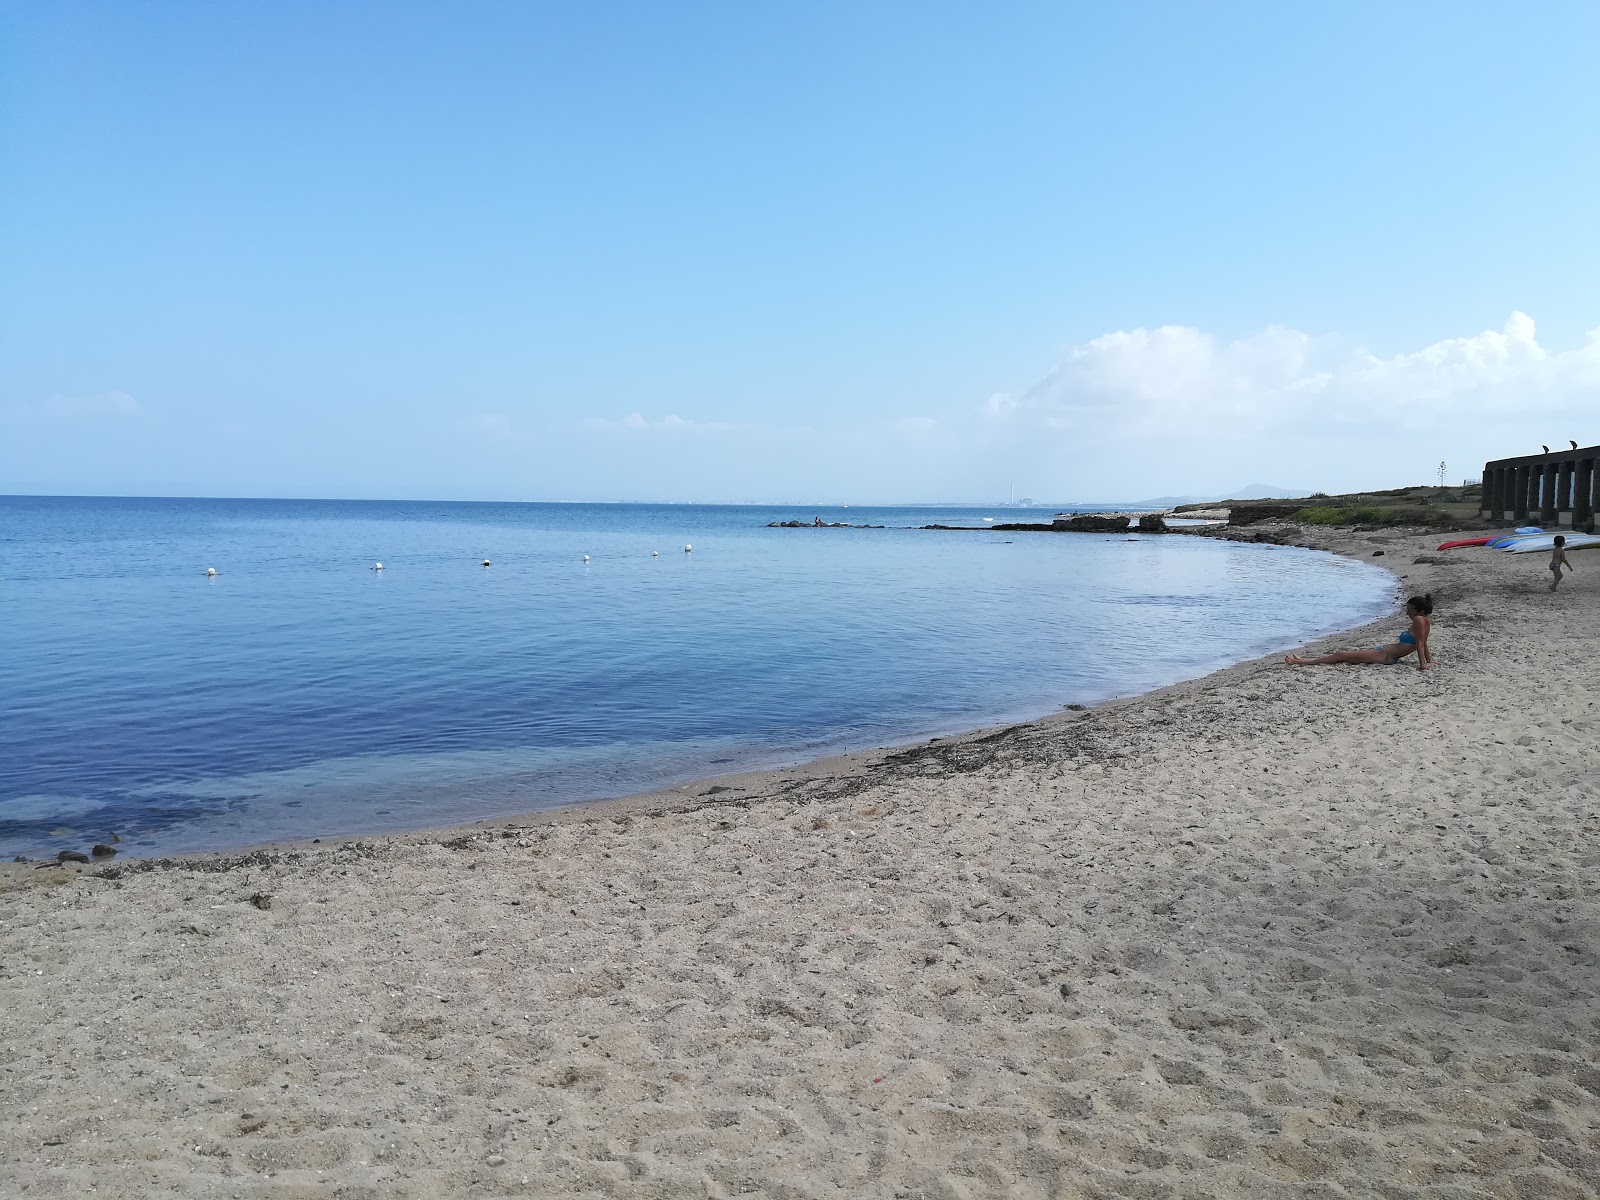 Photo of Spiaggia delle Tonnare and the settlement